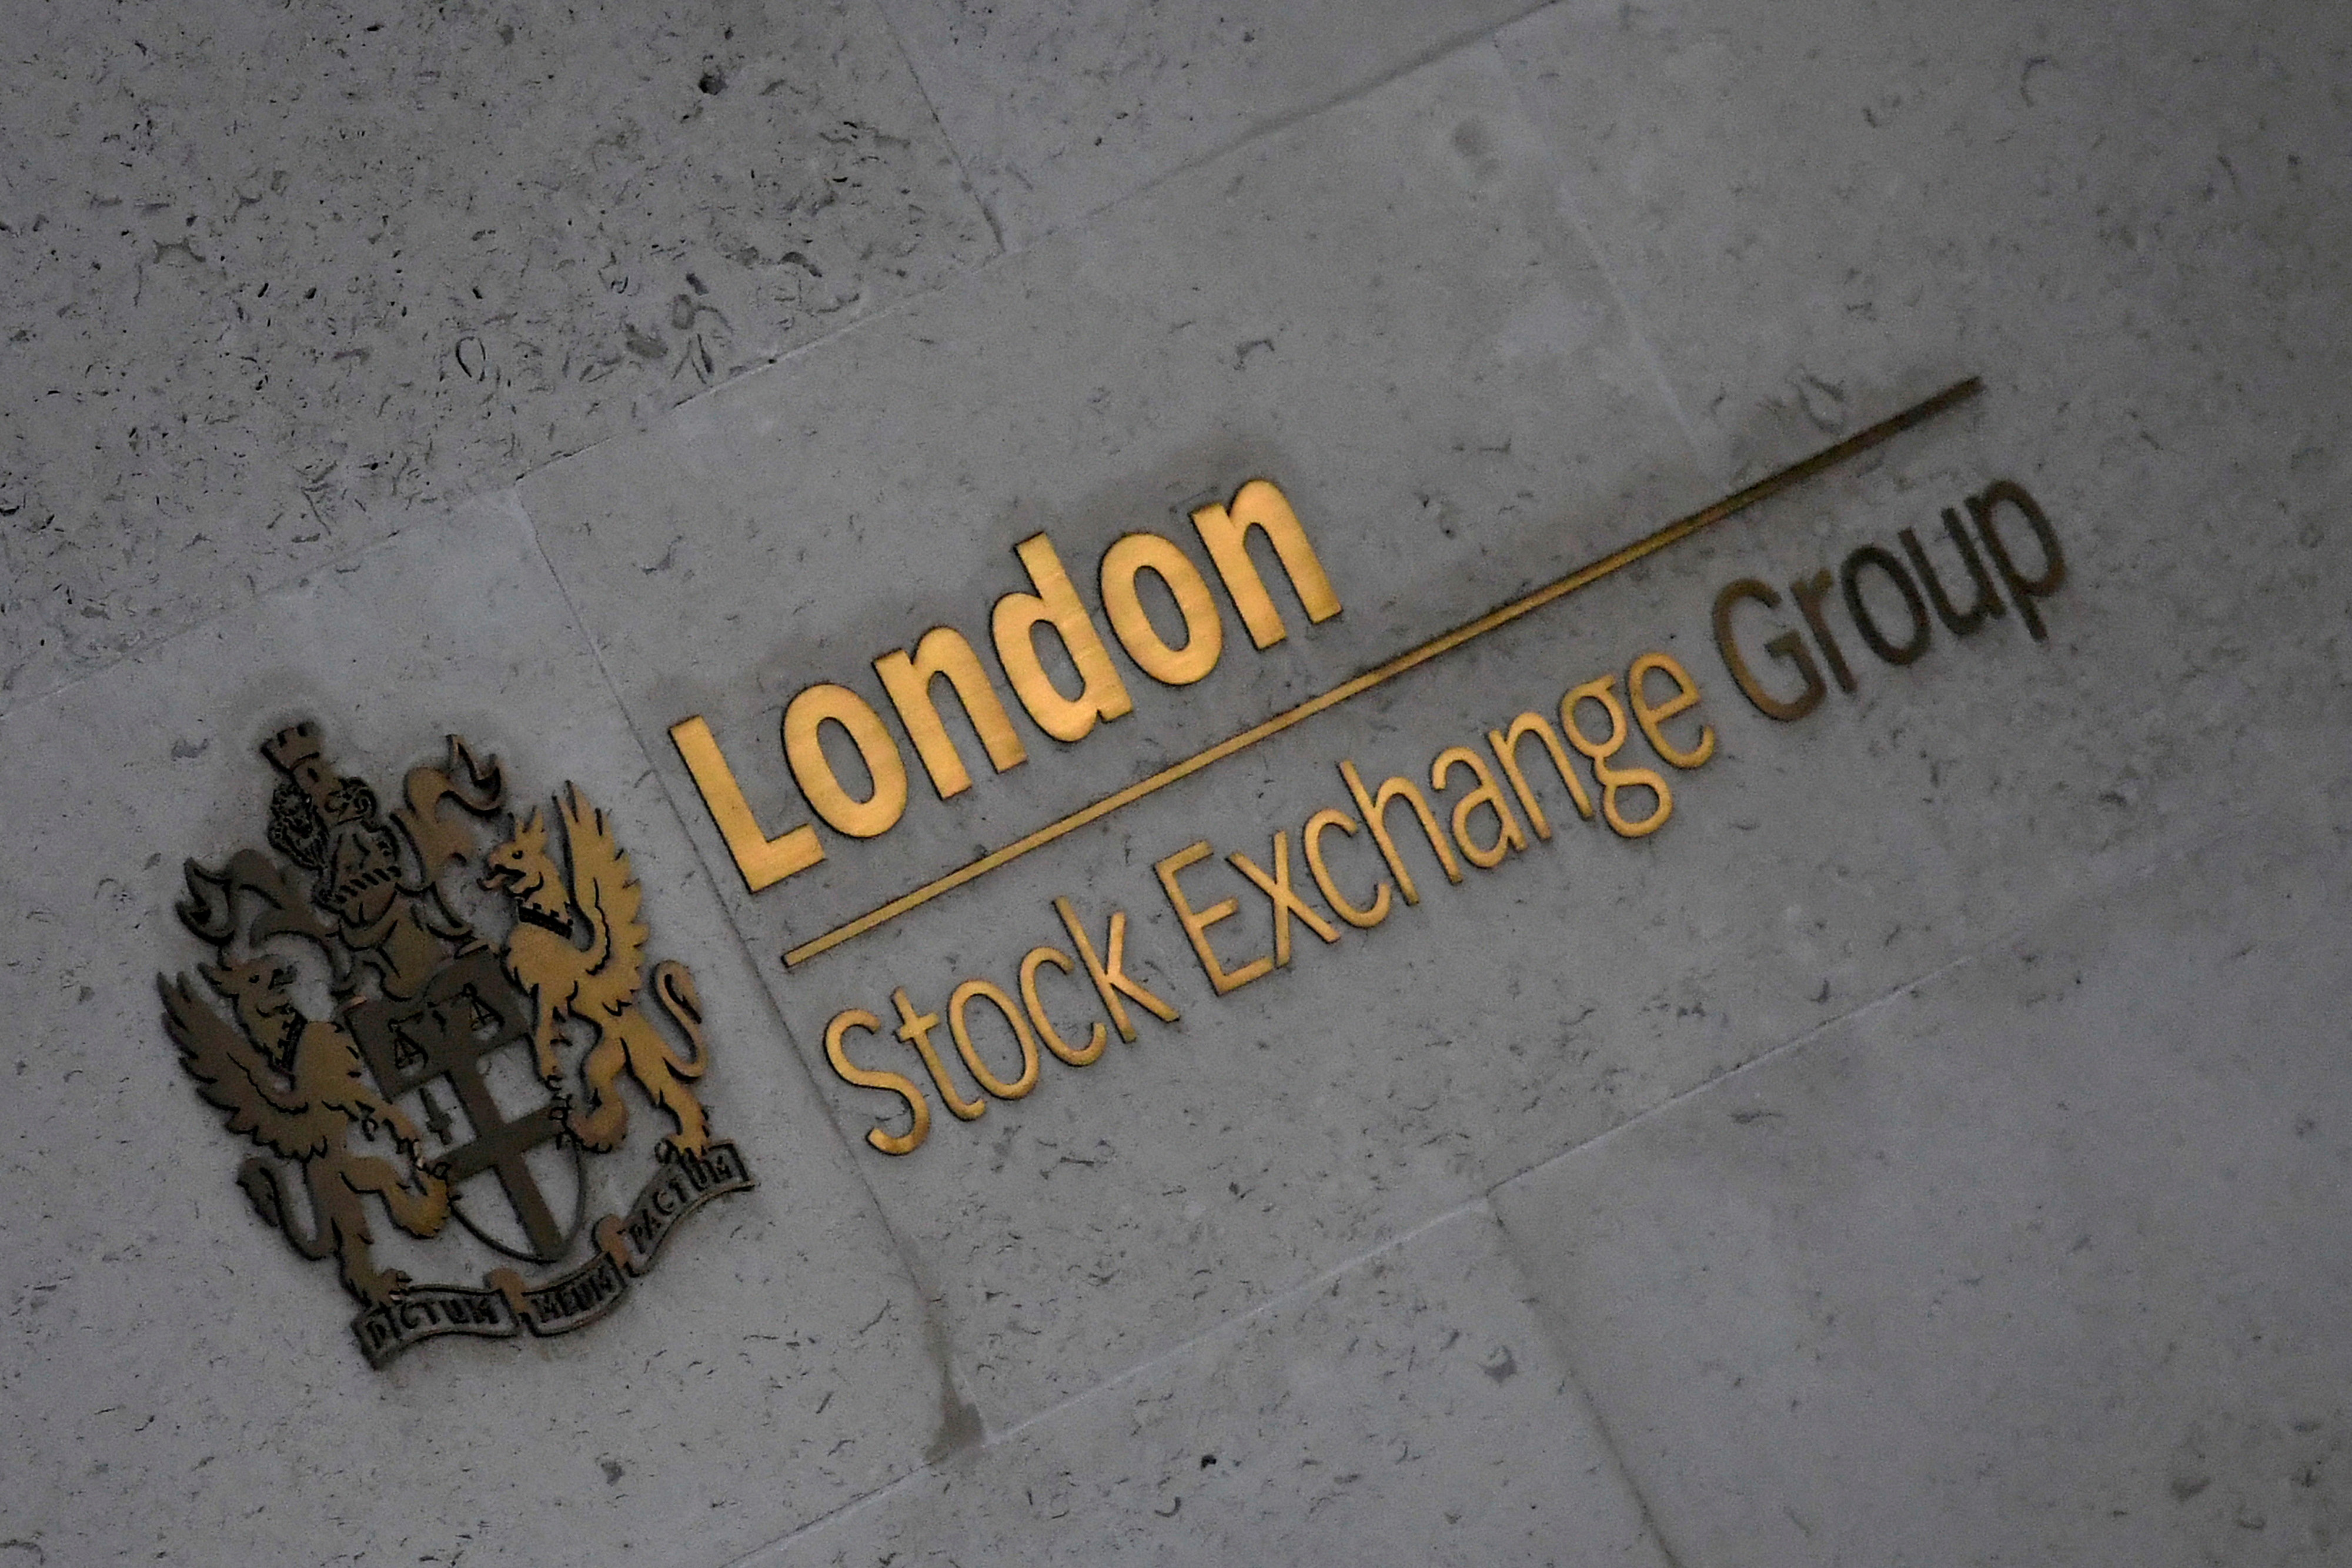 The London Stock Exchange Group offices in the City of London, Britain